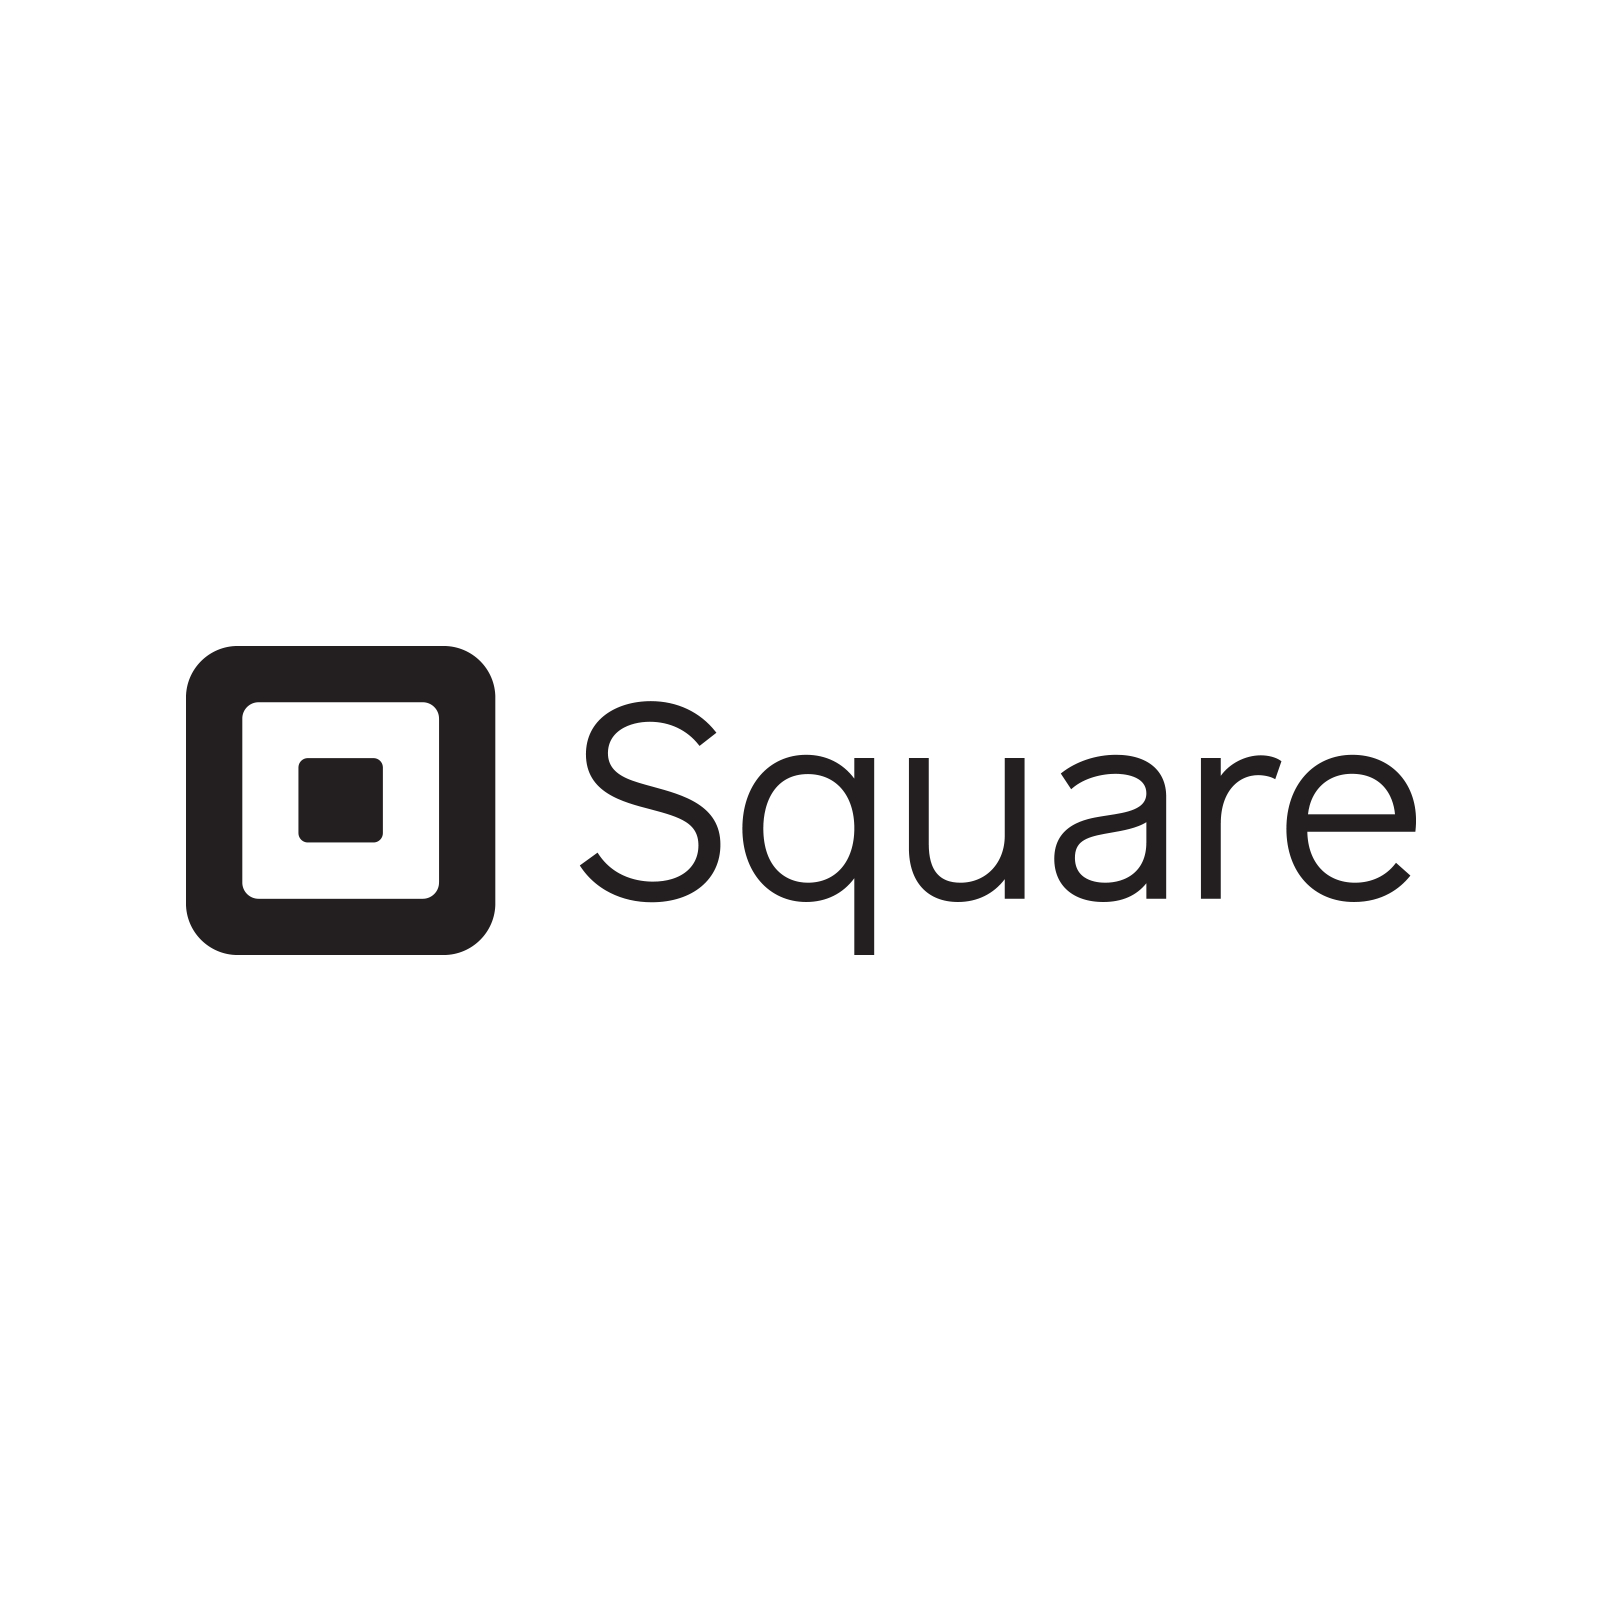 Make payments with Square!